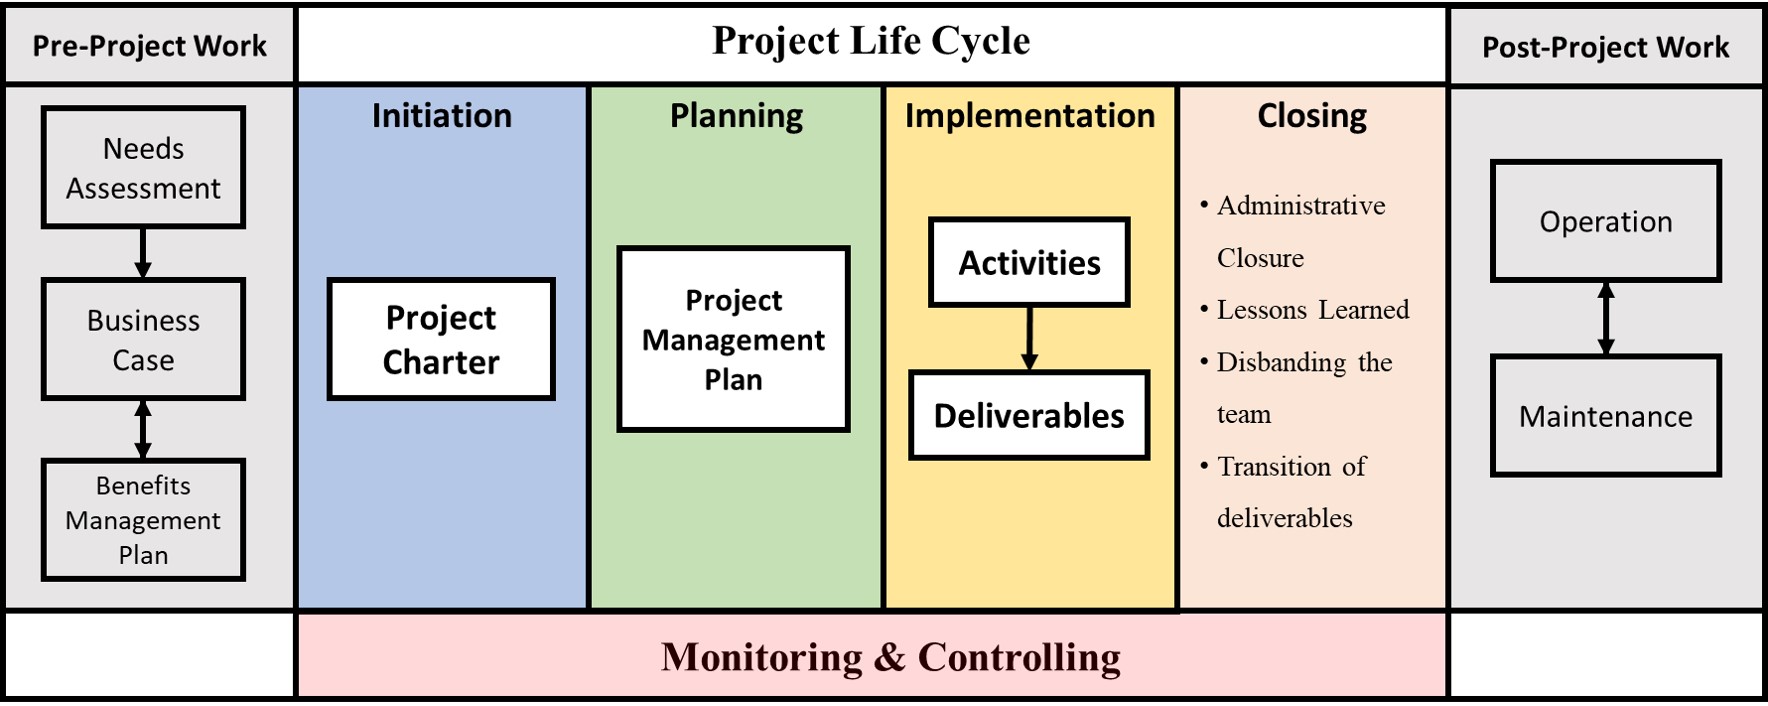 Figure 3.1: Pre-Project Work, Project Life Cycle, and Post-Project Work Source: PMBOK Guide 6th Edition. This figure is composed of six primary columns. The first one is titled "Pre-Project" Work. Following columns are Initiating, Planning, Implementation, and Closing. The sixth and final column title is Post-Project Work. Pre-Project Work includes Needs Assessment that is required to prepare a Business Case which should be in alignment with a benefits management plan. Initiation stage includes the preparation of a Project Charter. In the Planning stage, a Project Management Plan is prepared. Implementation stage includes the execution of activities and creating deliverables. Closing phase includes administrative closure, lessons learned, disbanding the team, and transition of deliverables. Post-project work consists of operations and maintenance. Monitoring and controlling overlaps with all four project life stages.